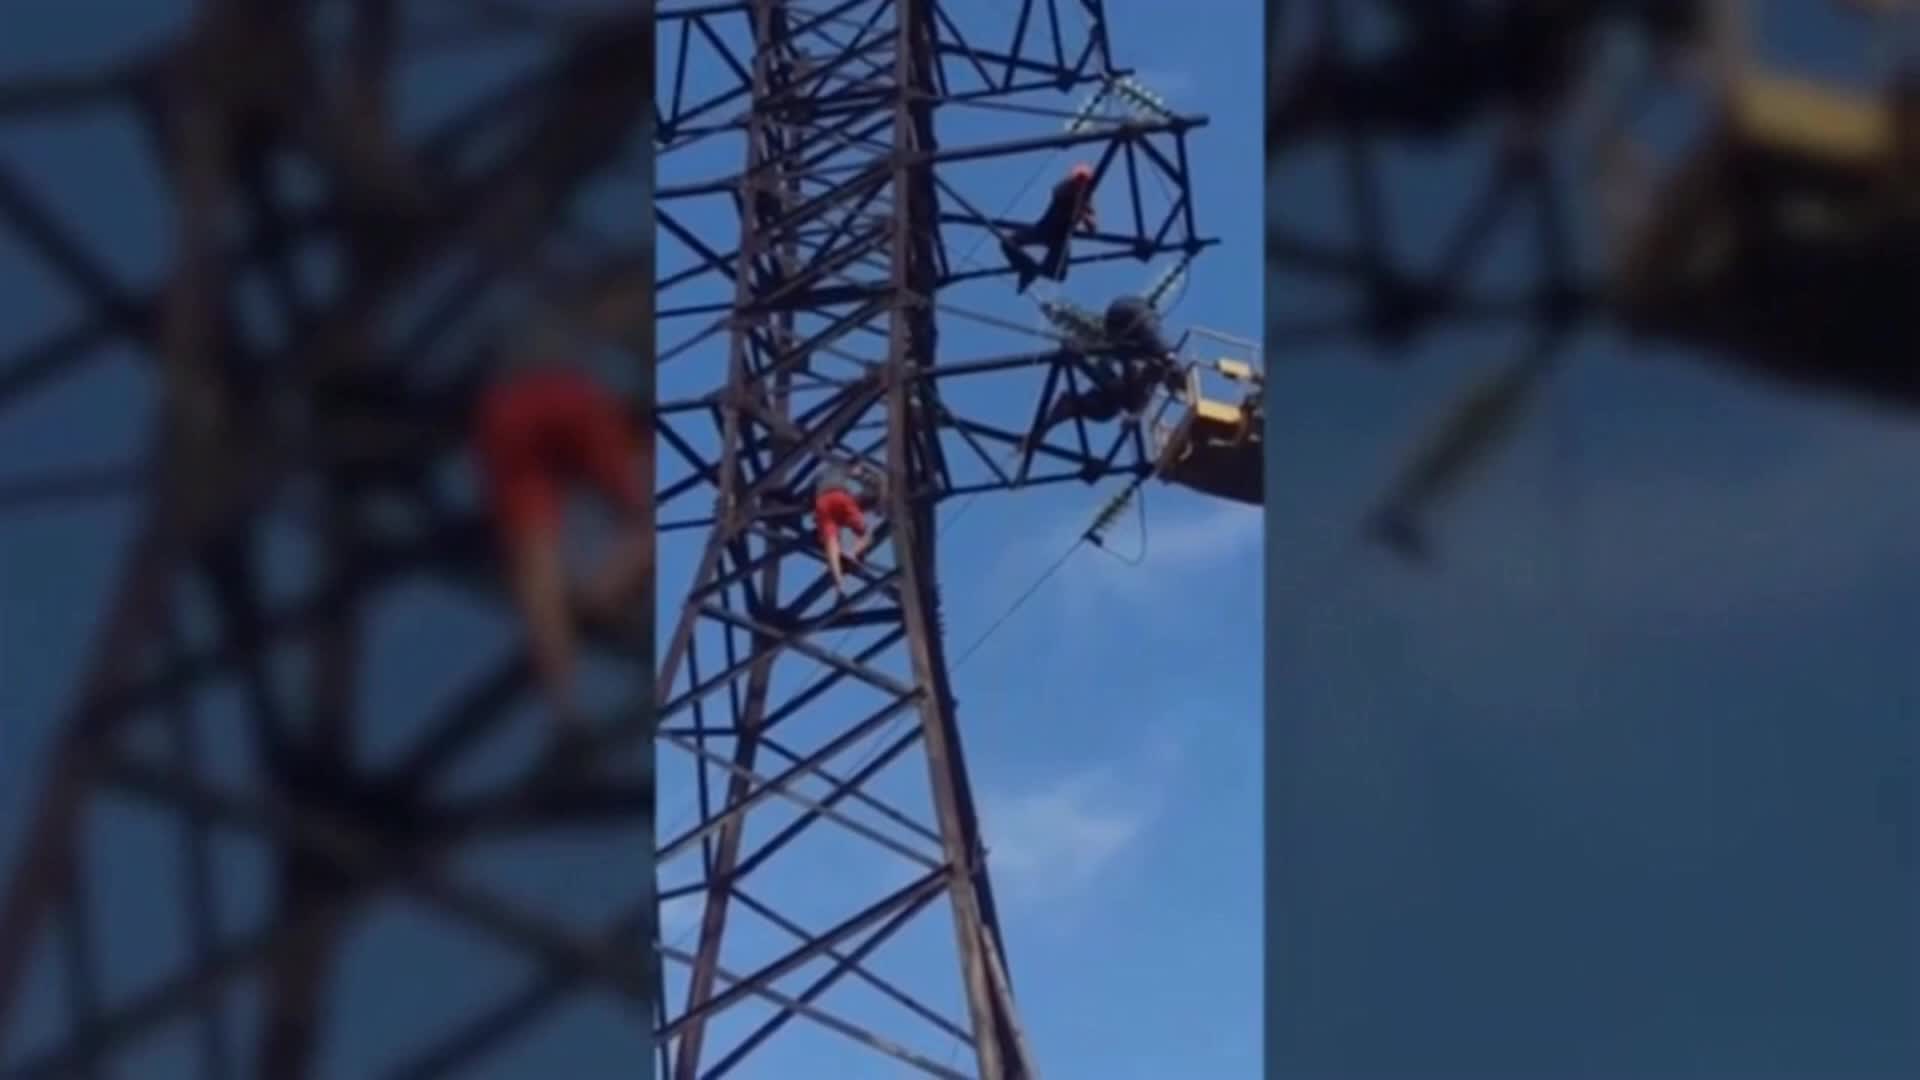 Ukraine's 16-year-old teenager crawled onto a high-voltage power tower and died of electrocution